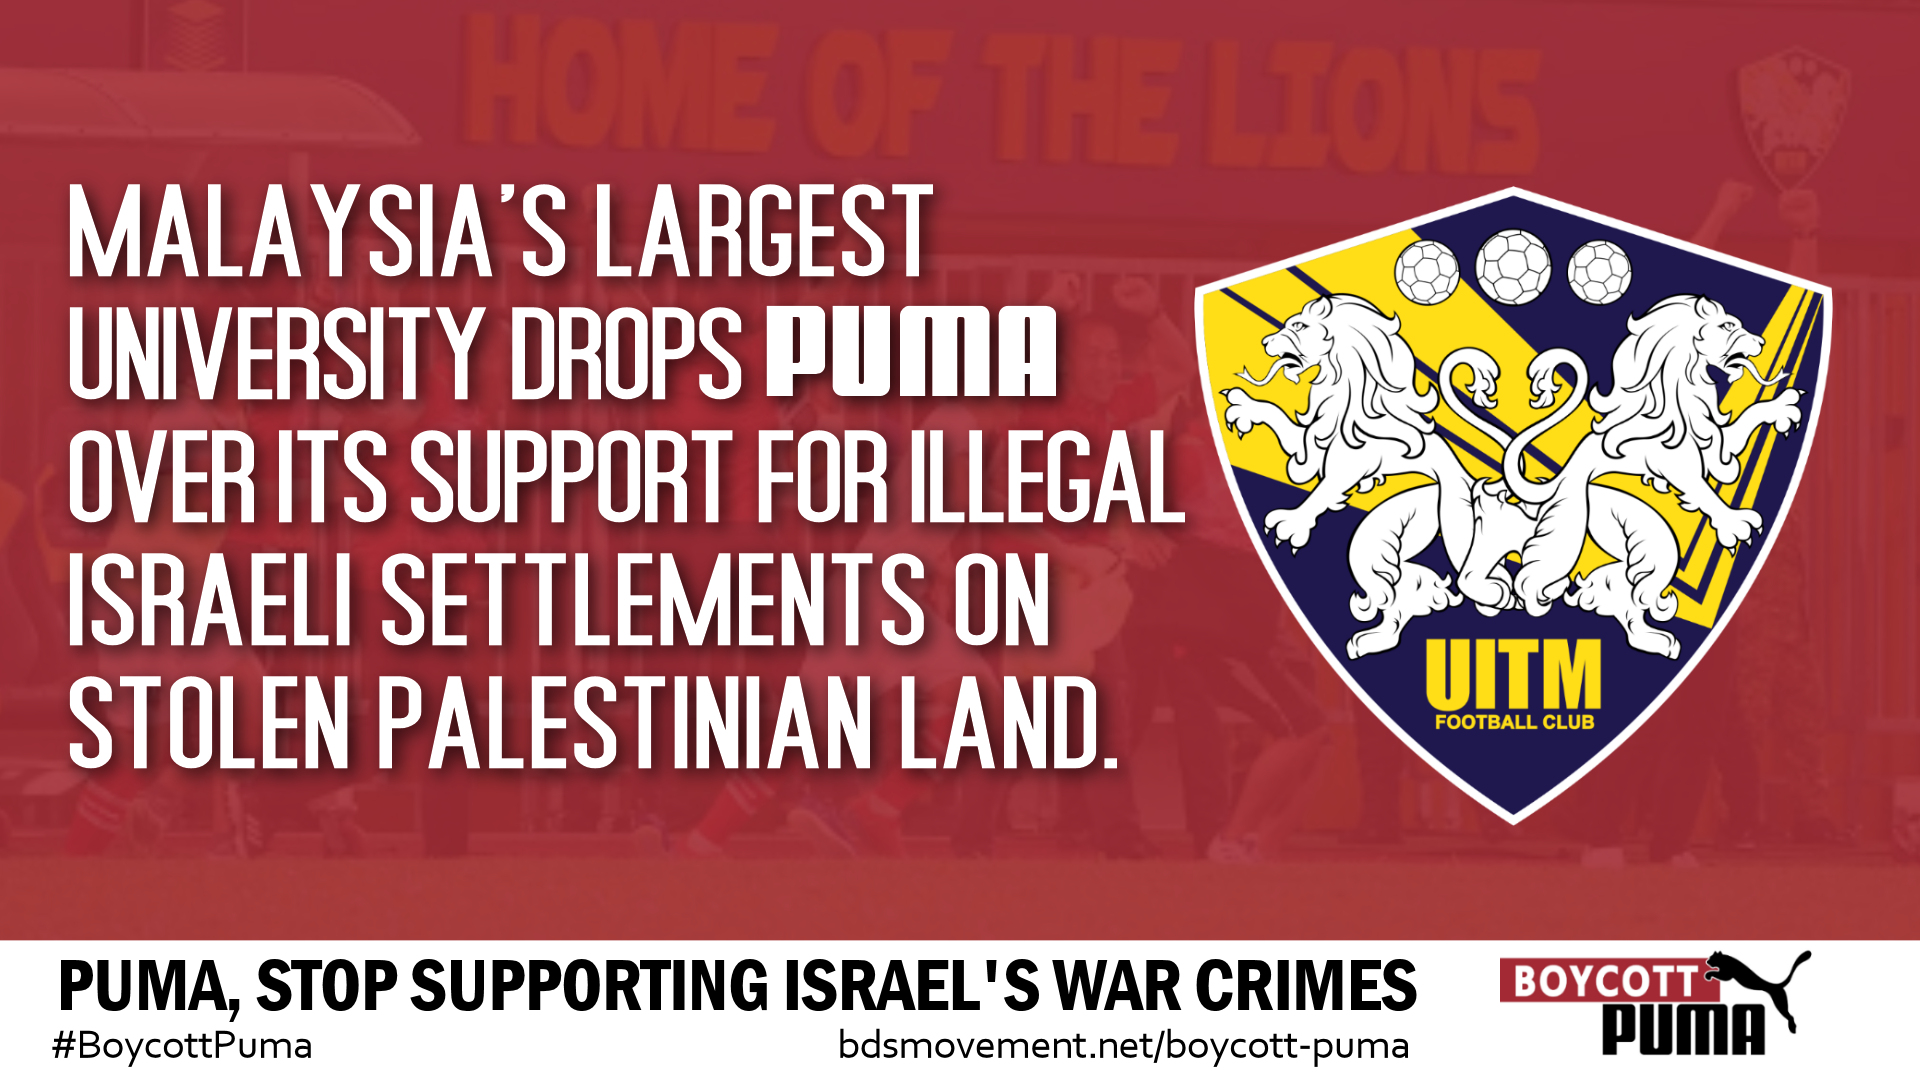 Largest Malaysian university ends sponsorship deal with Puma over support for illegal Israeli settlements